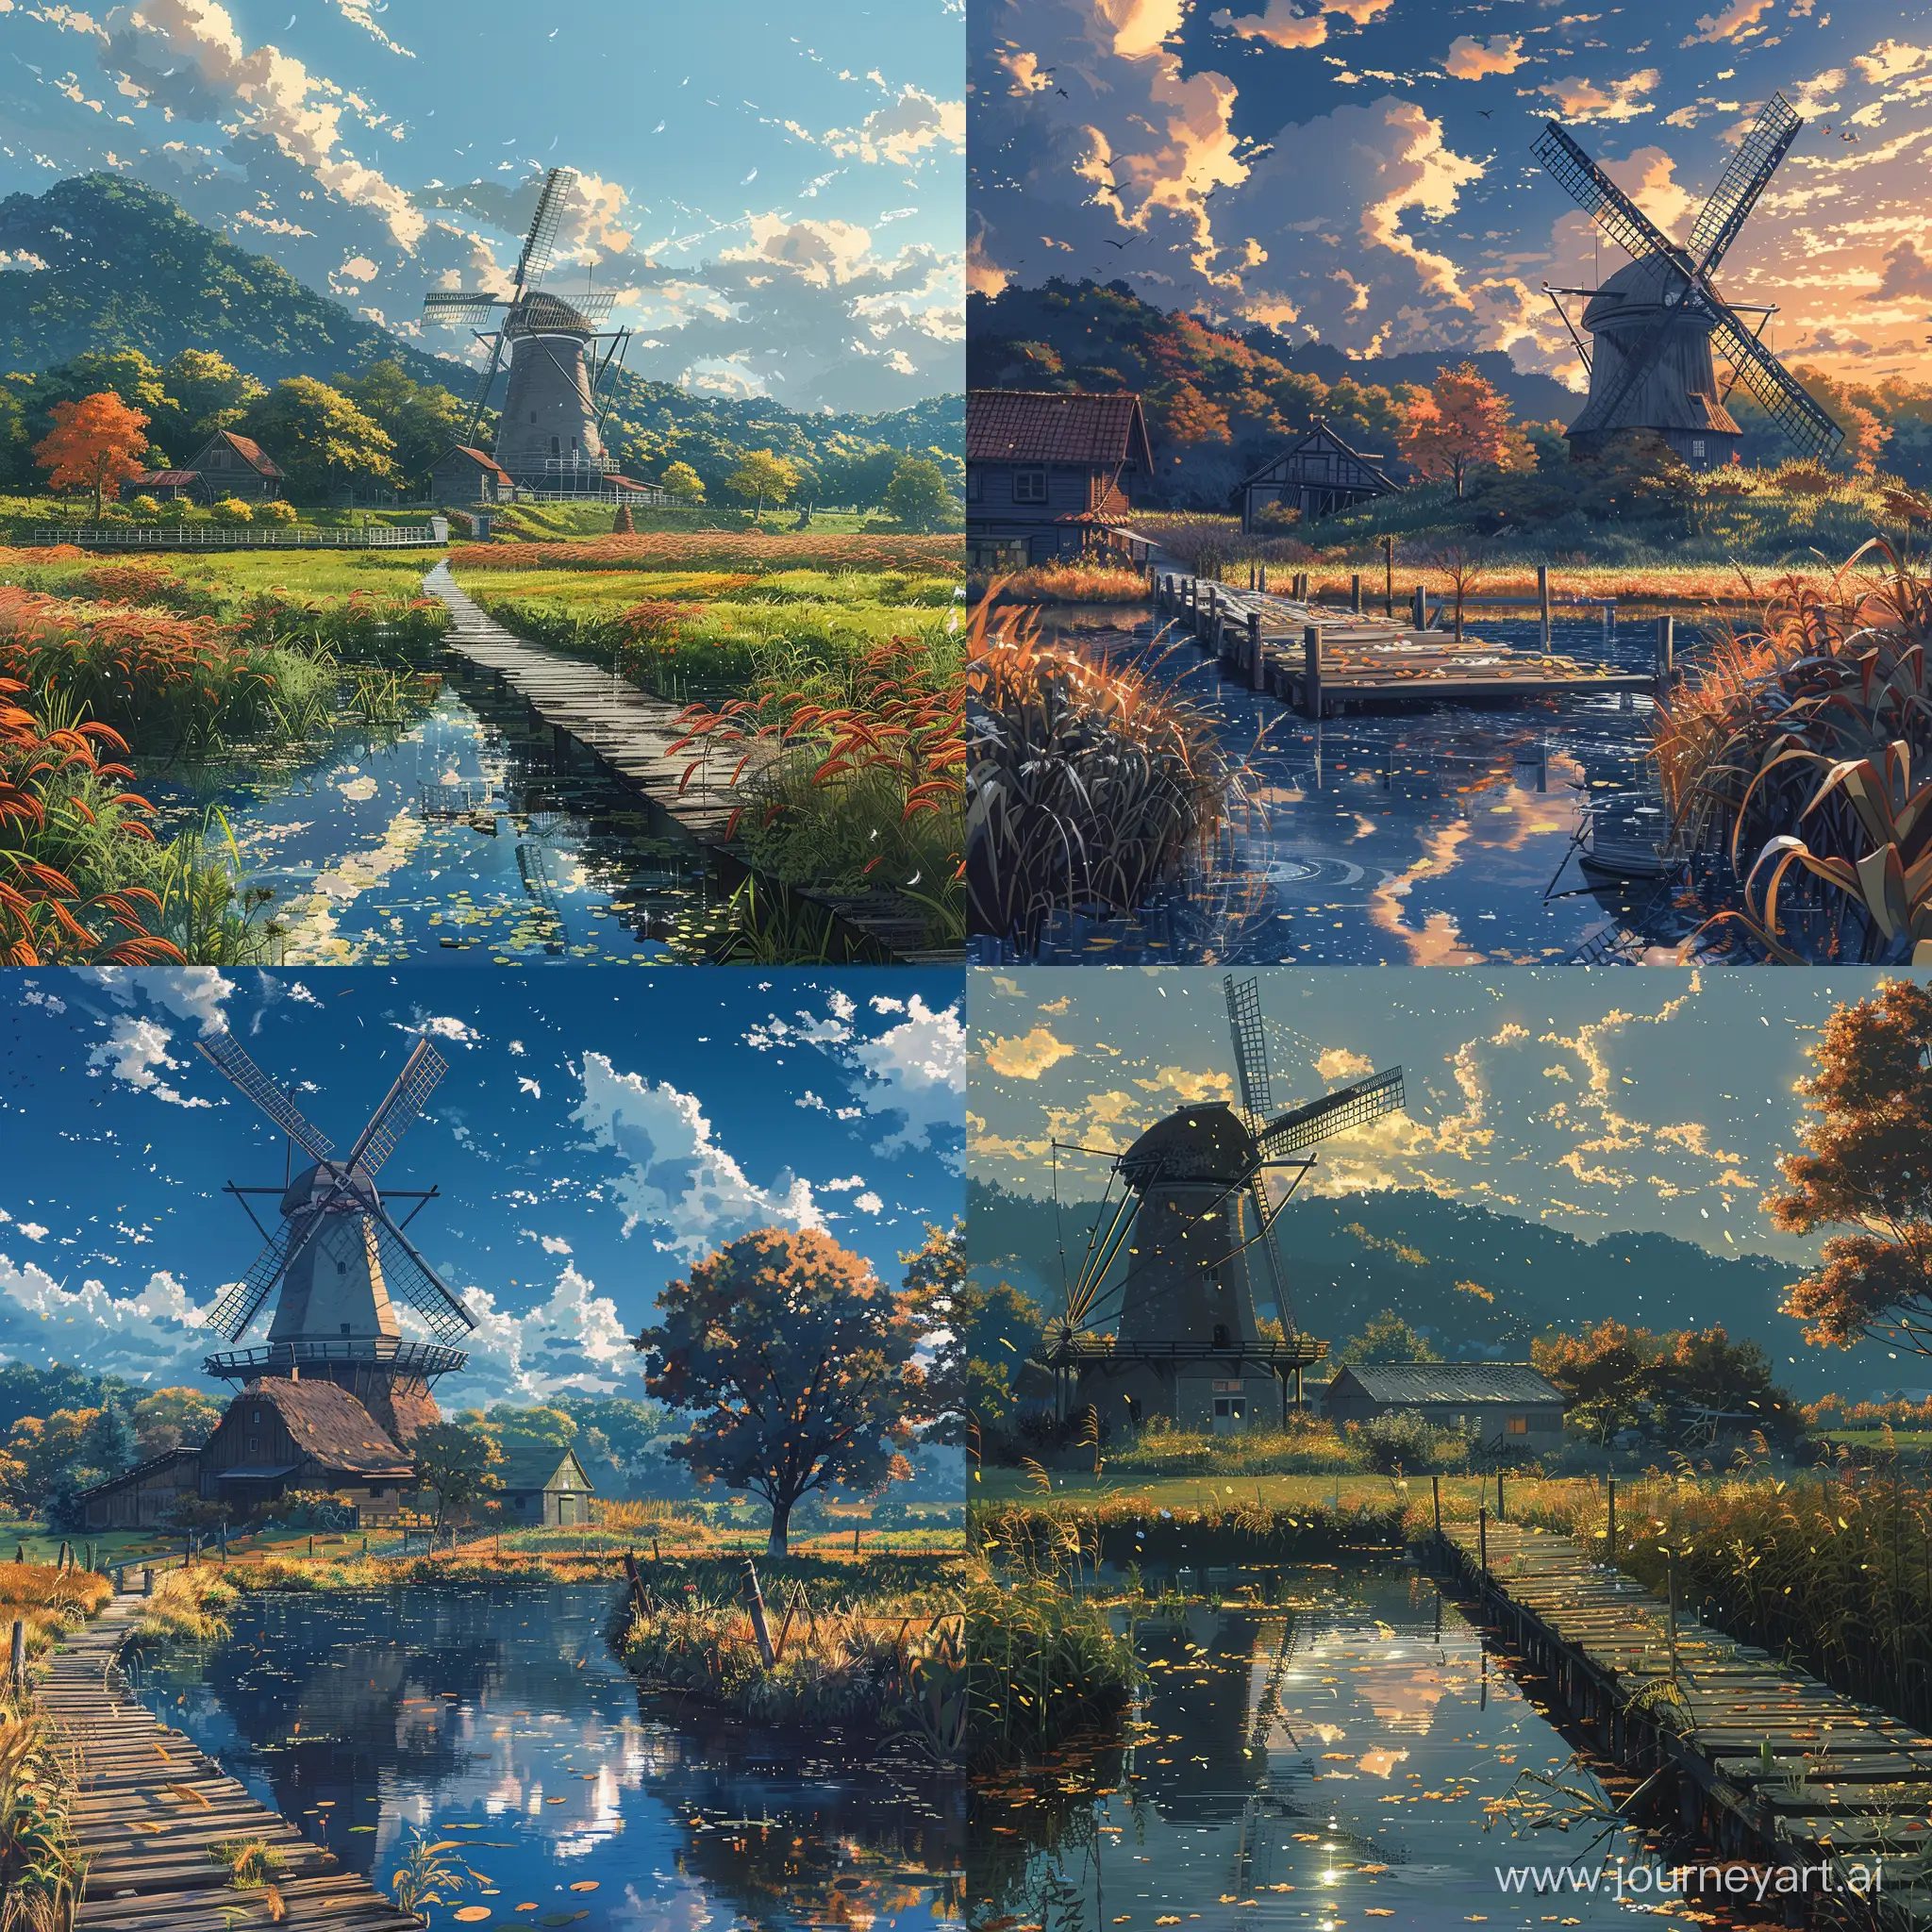 Tranquil-Morning-at-the-Countryside-Windmill-Harvest-Festival-Anime-Illustration